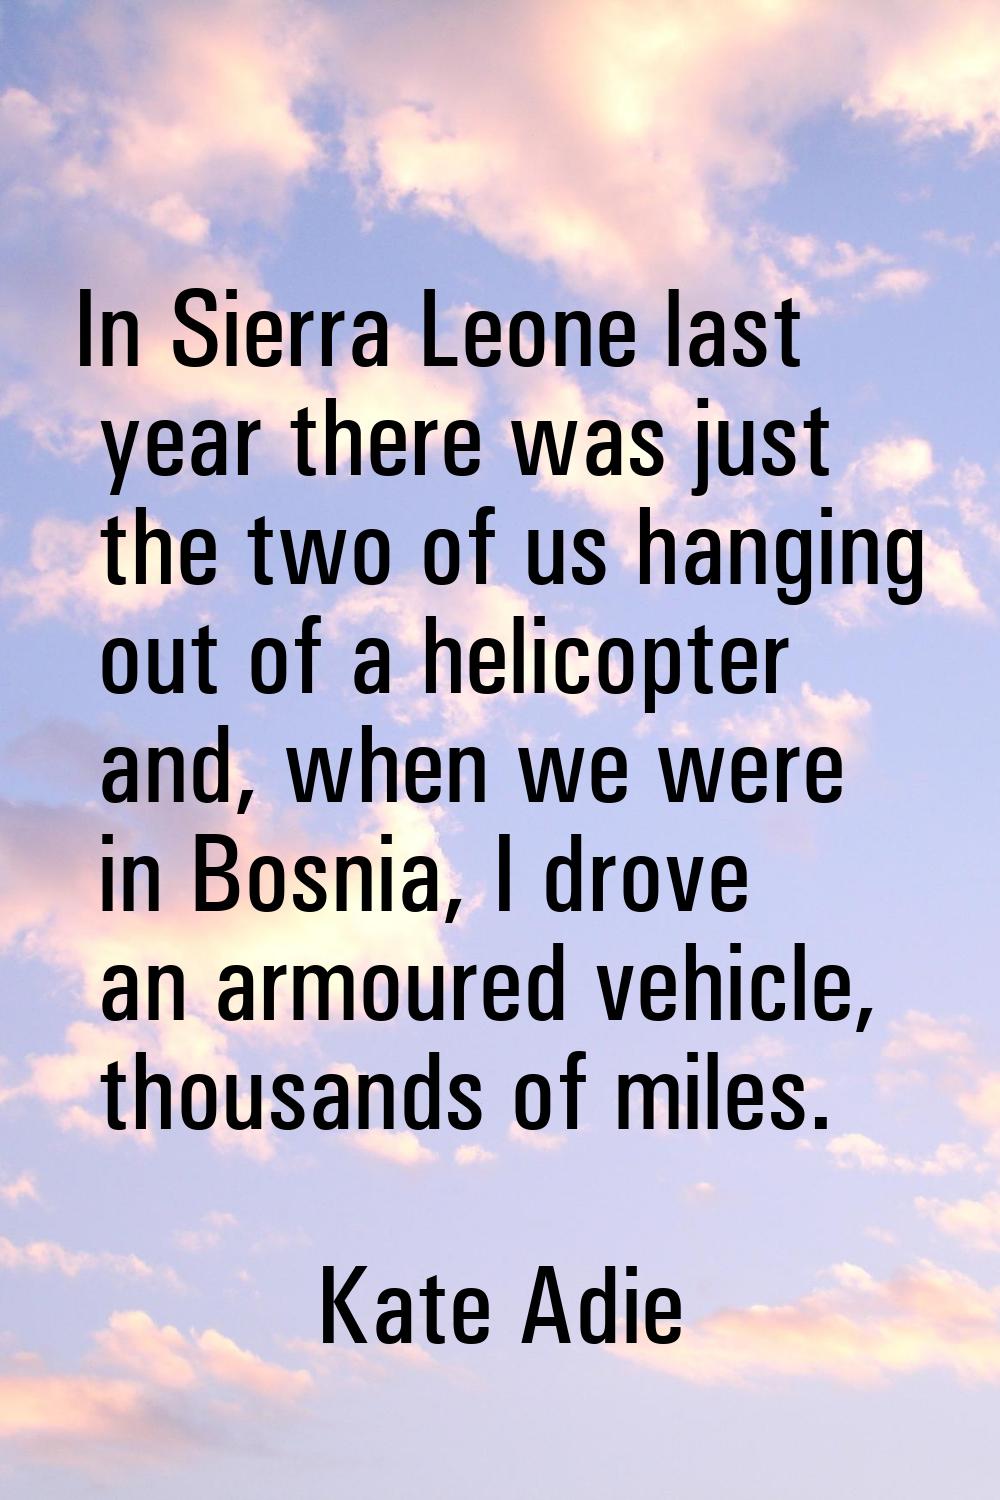 In Sierra Leone last year there was just the two of us hanging out of a helicopter and, when we wer